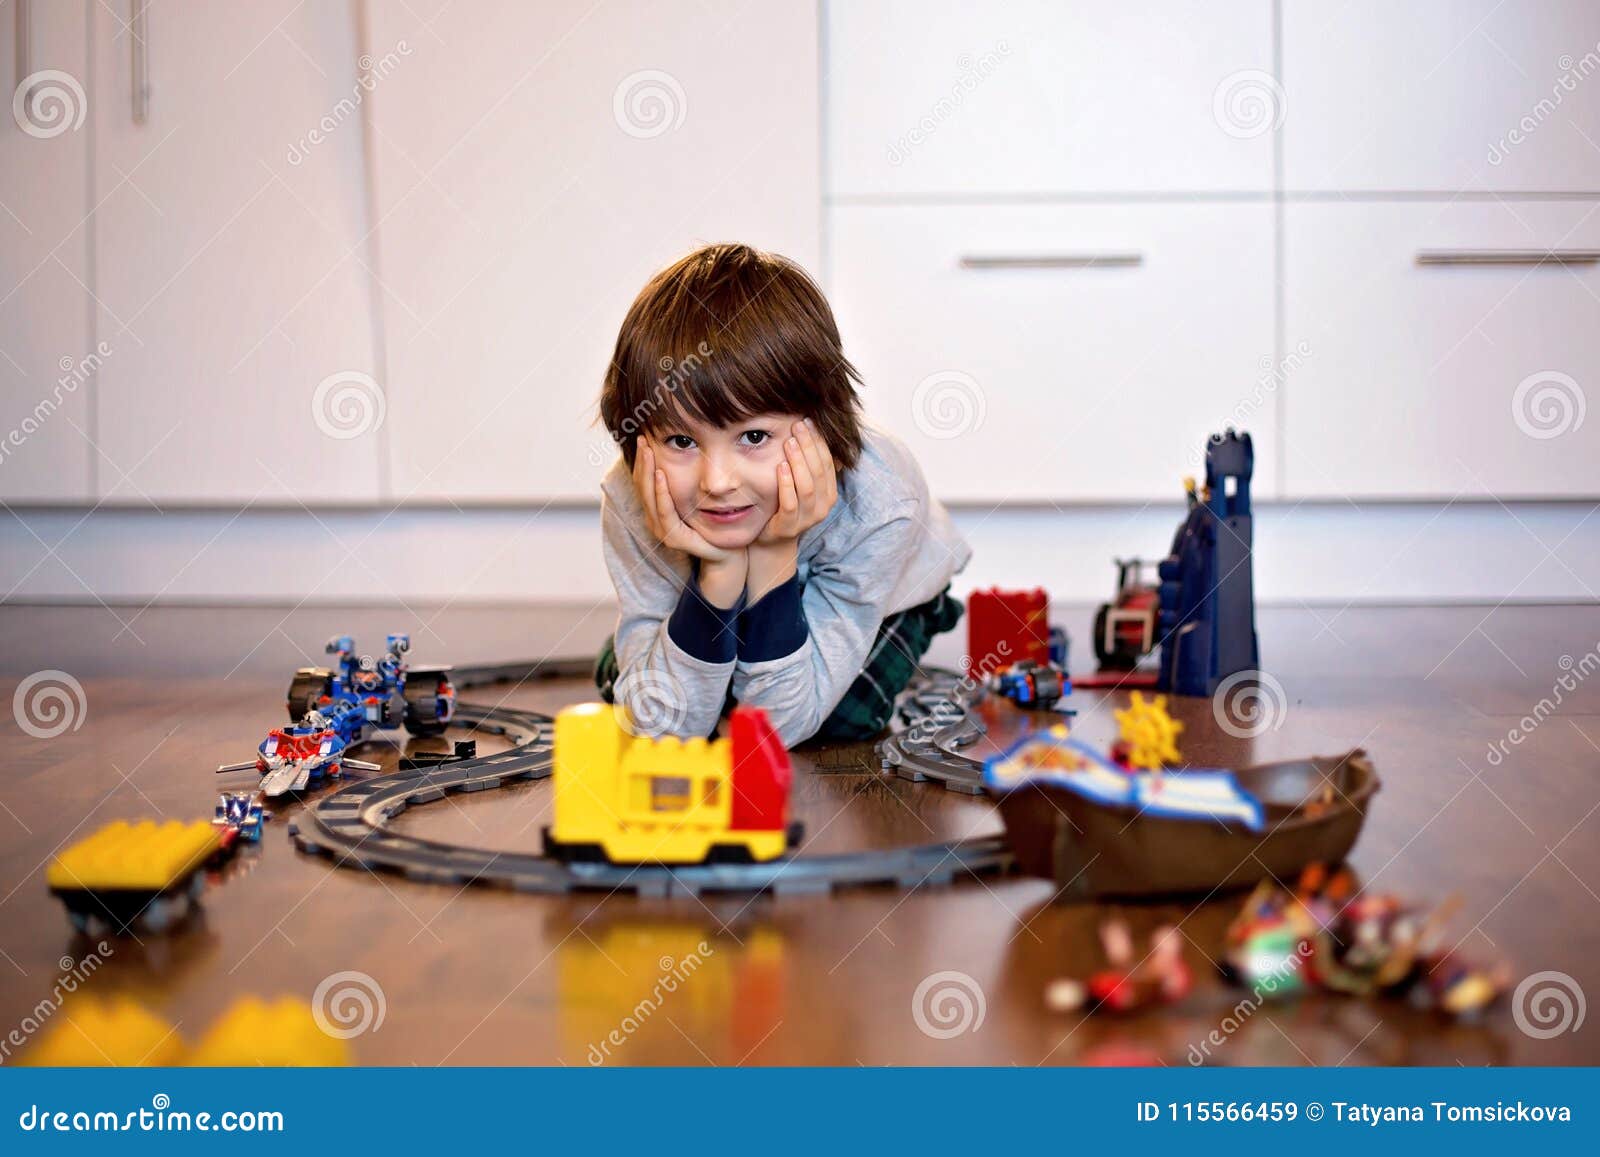 Child Boy Playing In Living Room With A Toy Train Stock Image Image